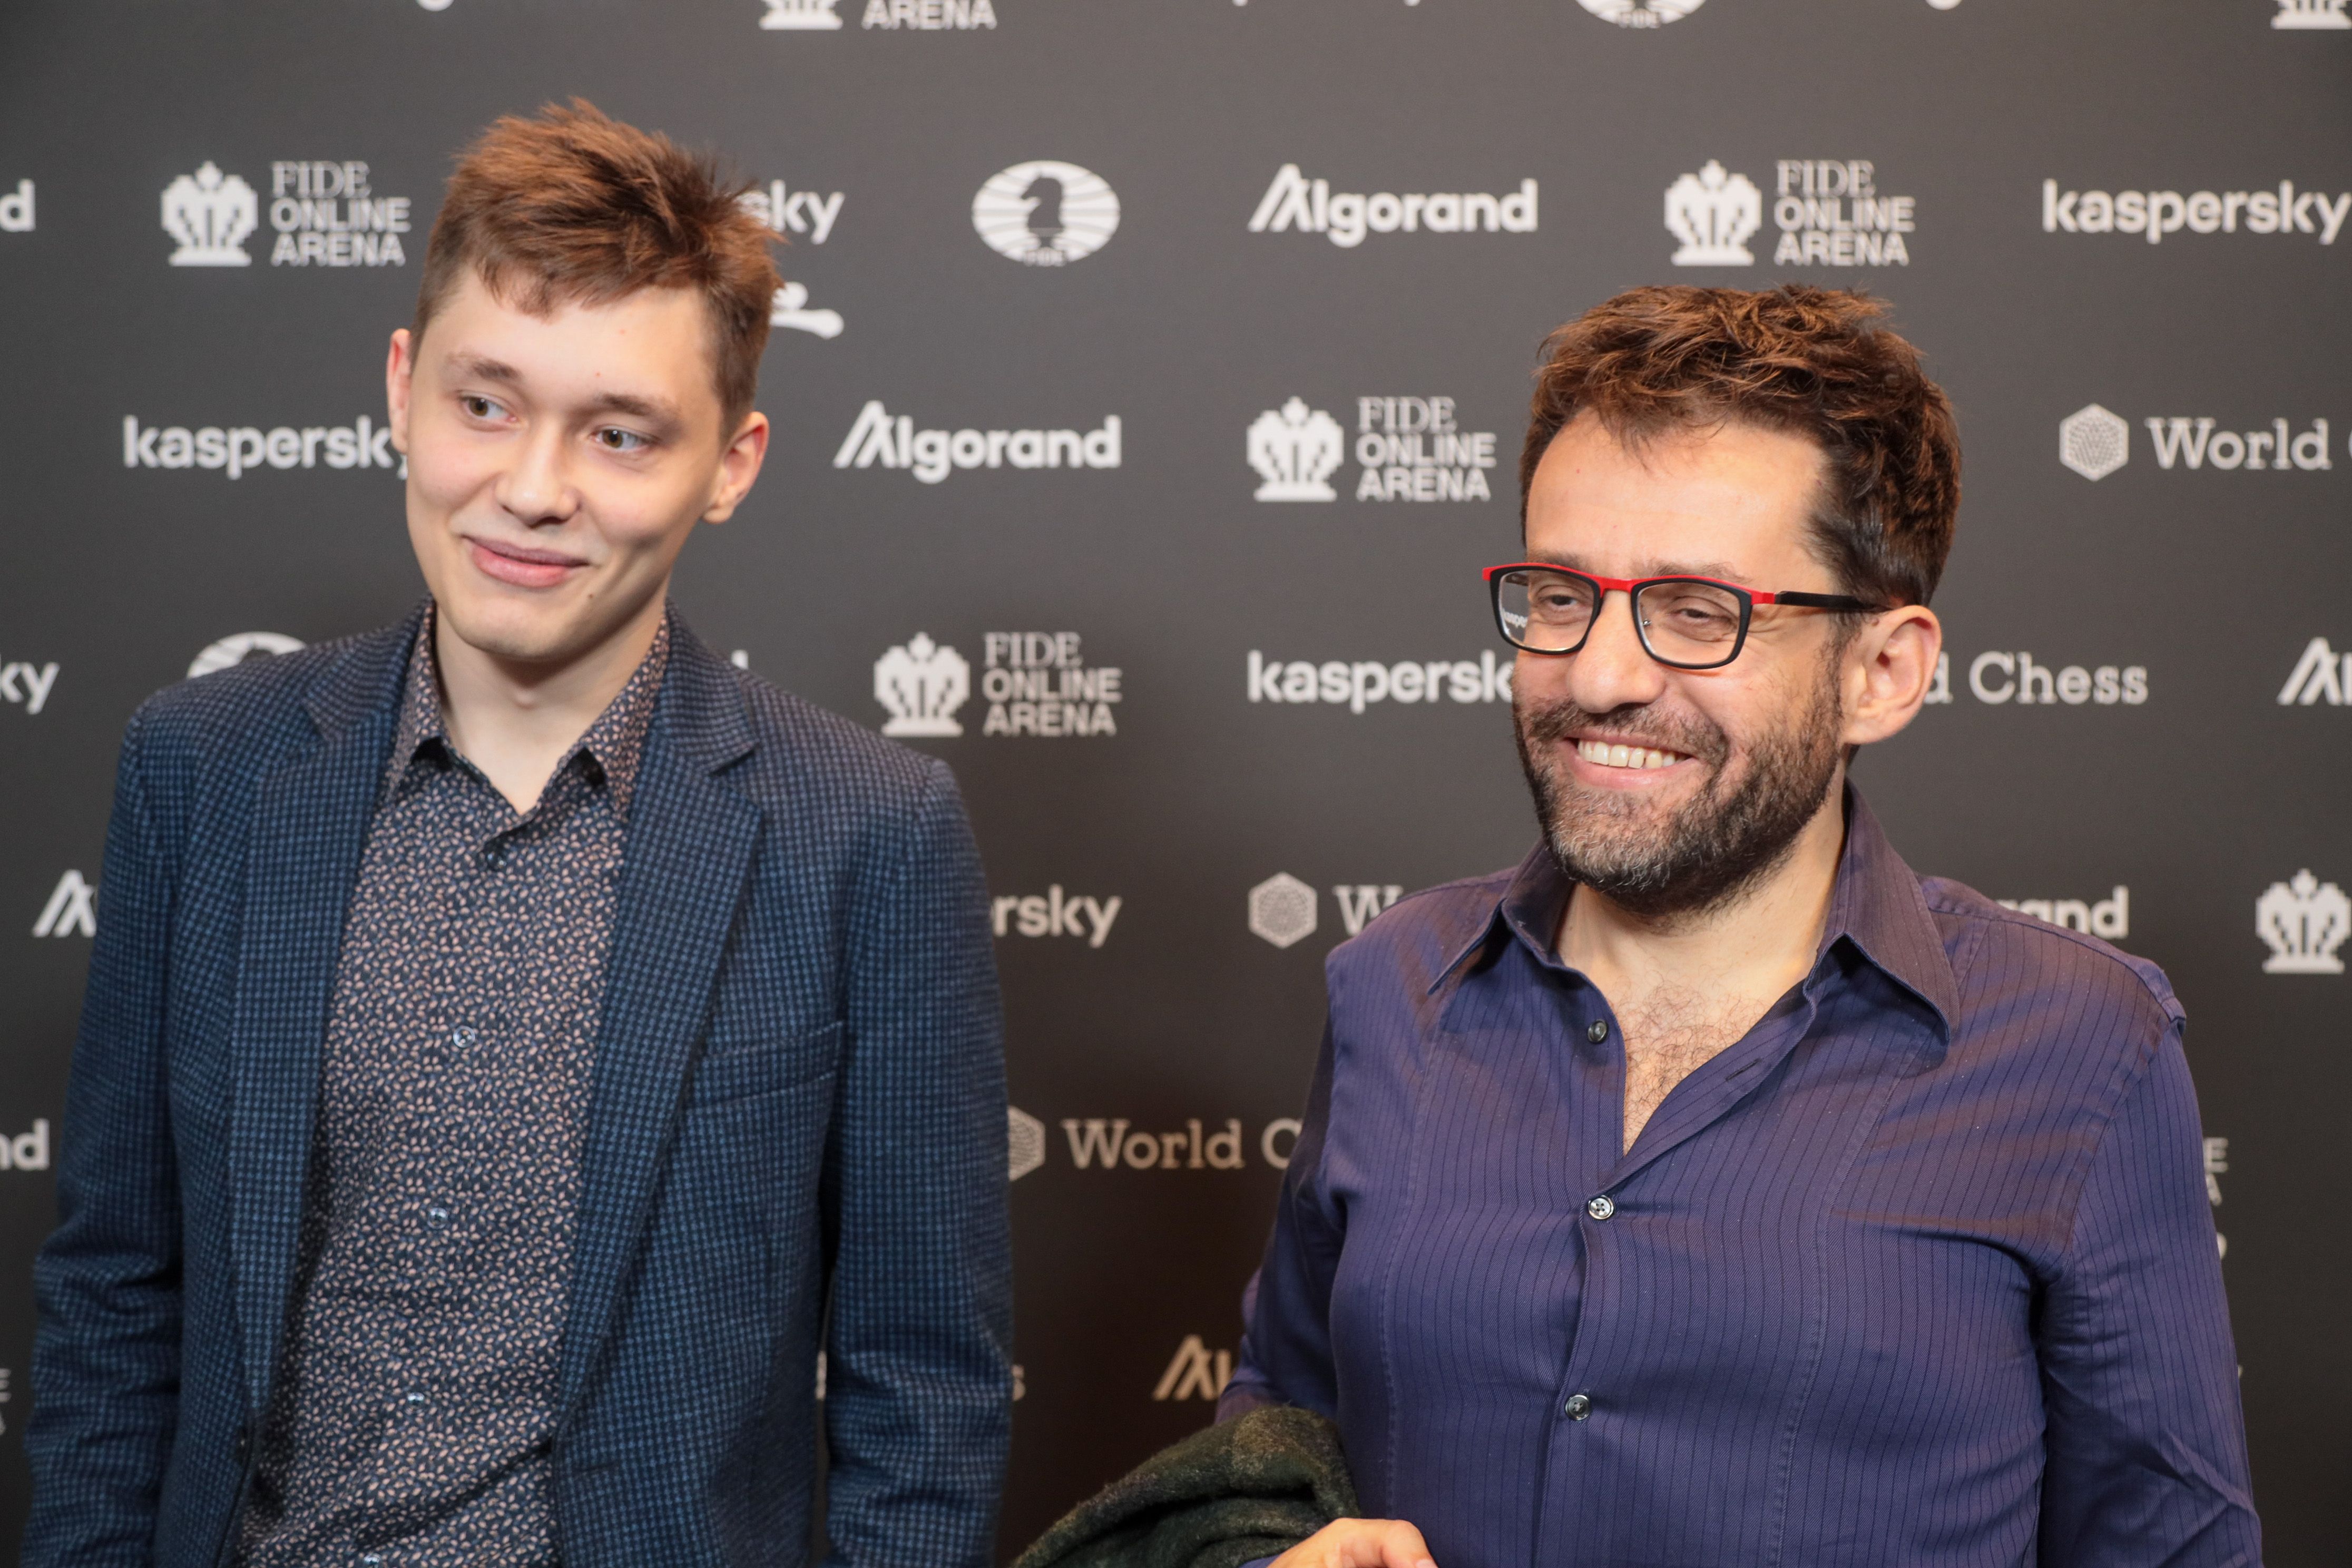 FIDE - International Chess Federation - The FIDE rating list for March 2022  is out. Levon Aronian gained 13 points from the Berlin #FIDEgrandprix;  combined with an 11-point loss by Caruana, this